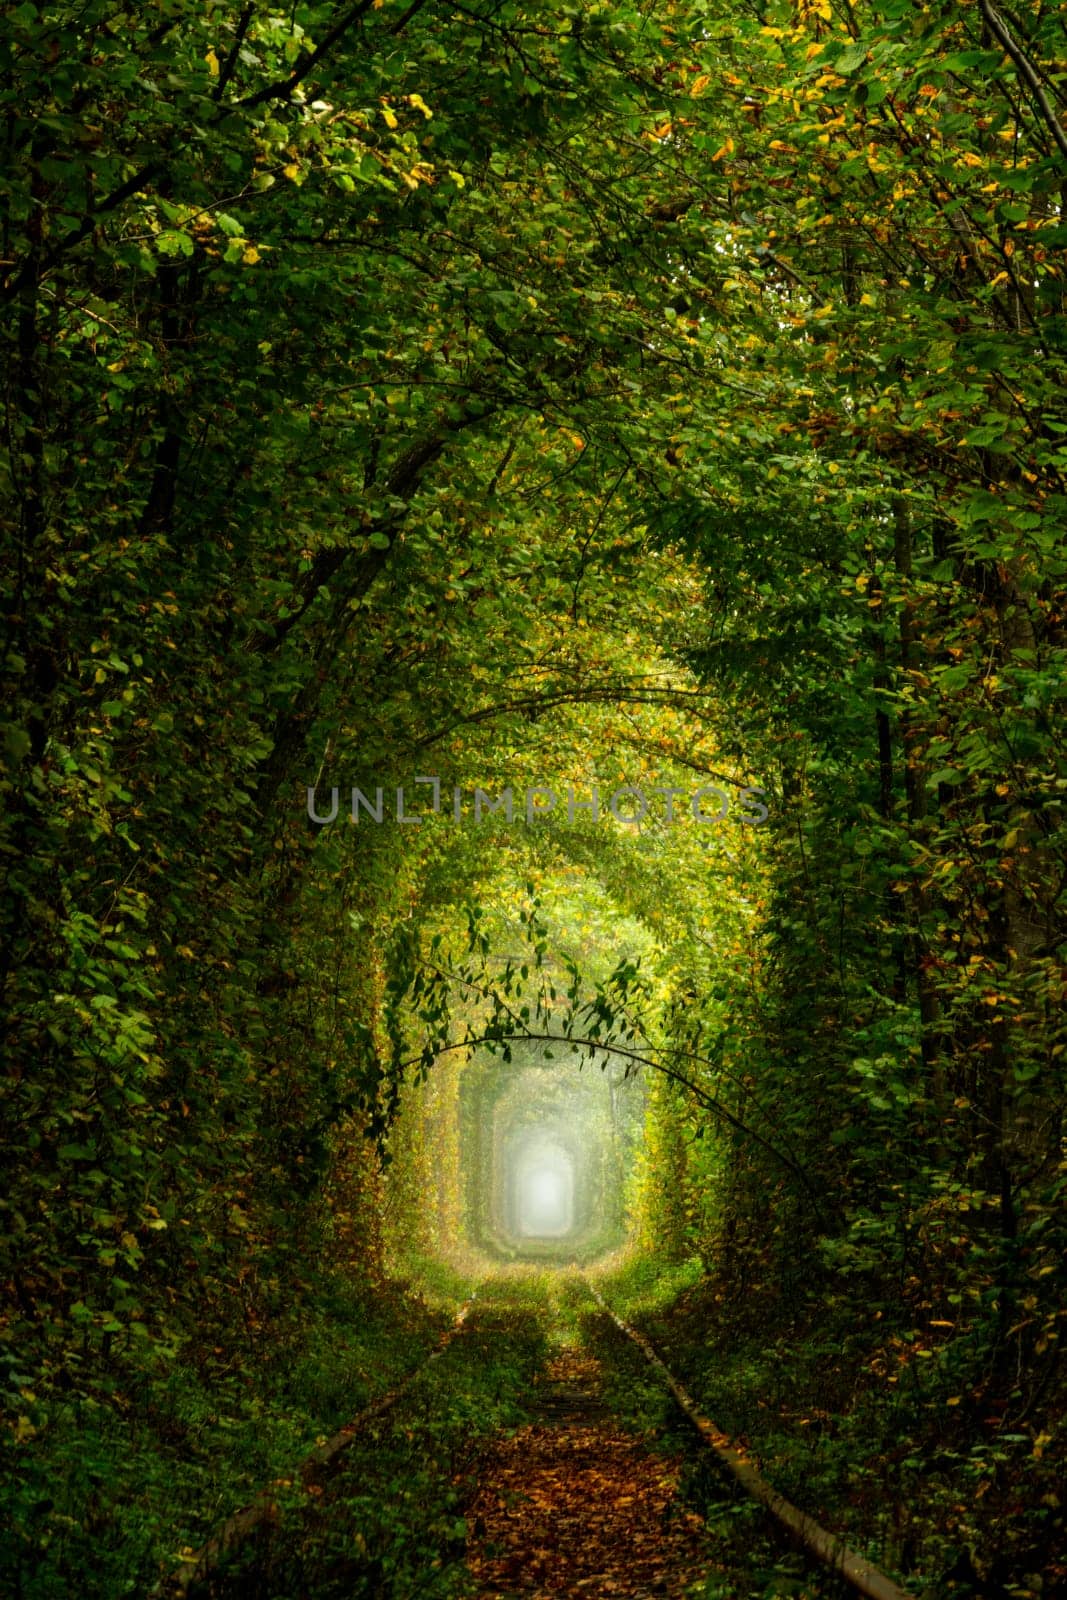 Sunny summer day in the Rivne region of Ukraine. Tunnel of love in Klevan. The deciduous forest creates dense shade. Romantic green branch